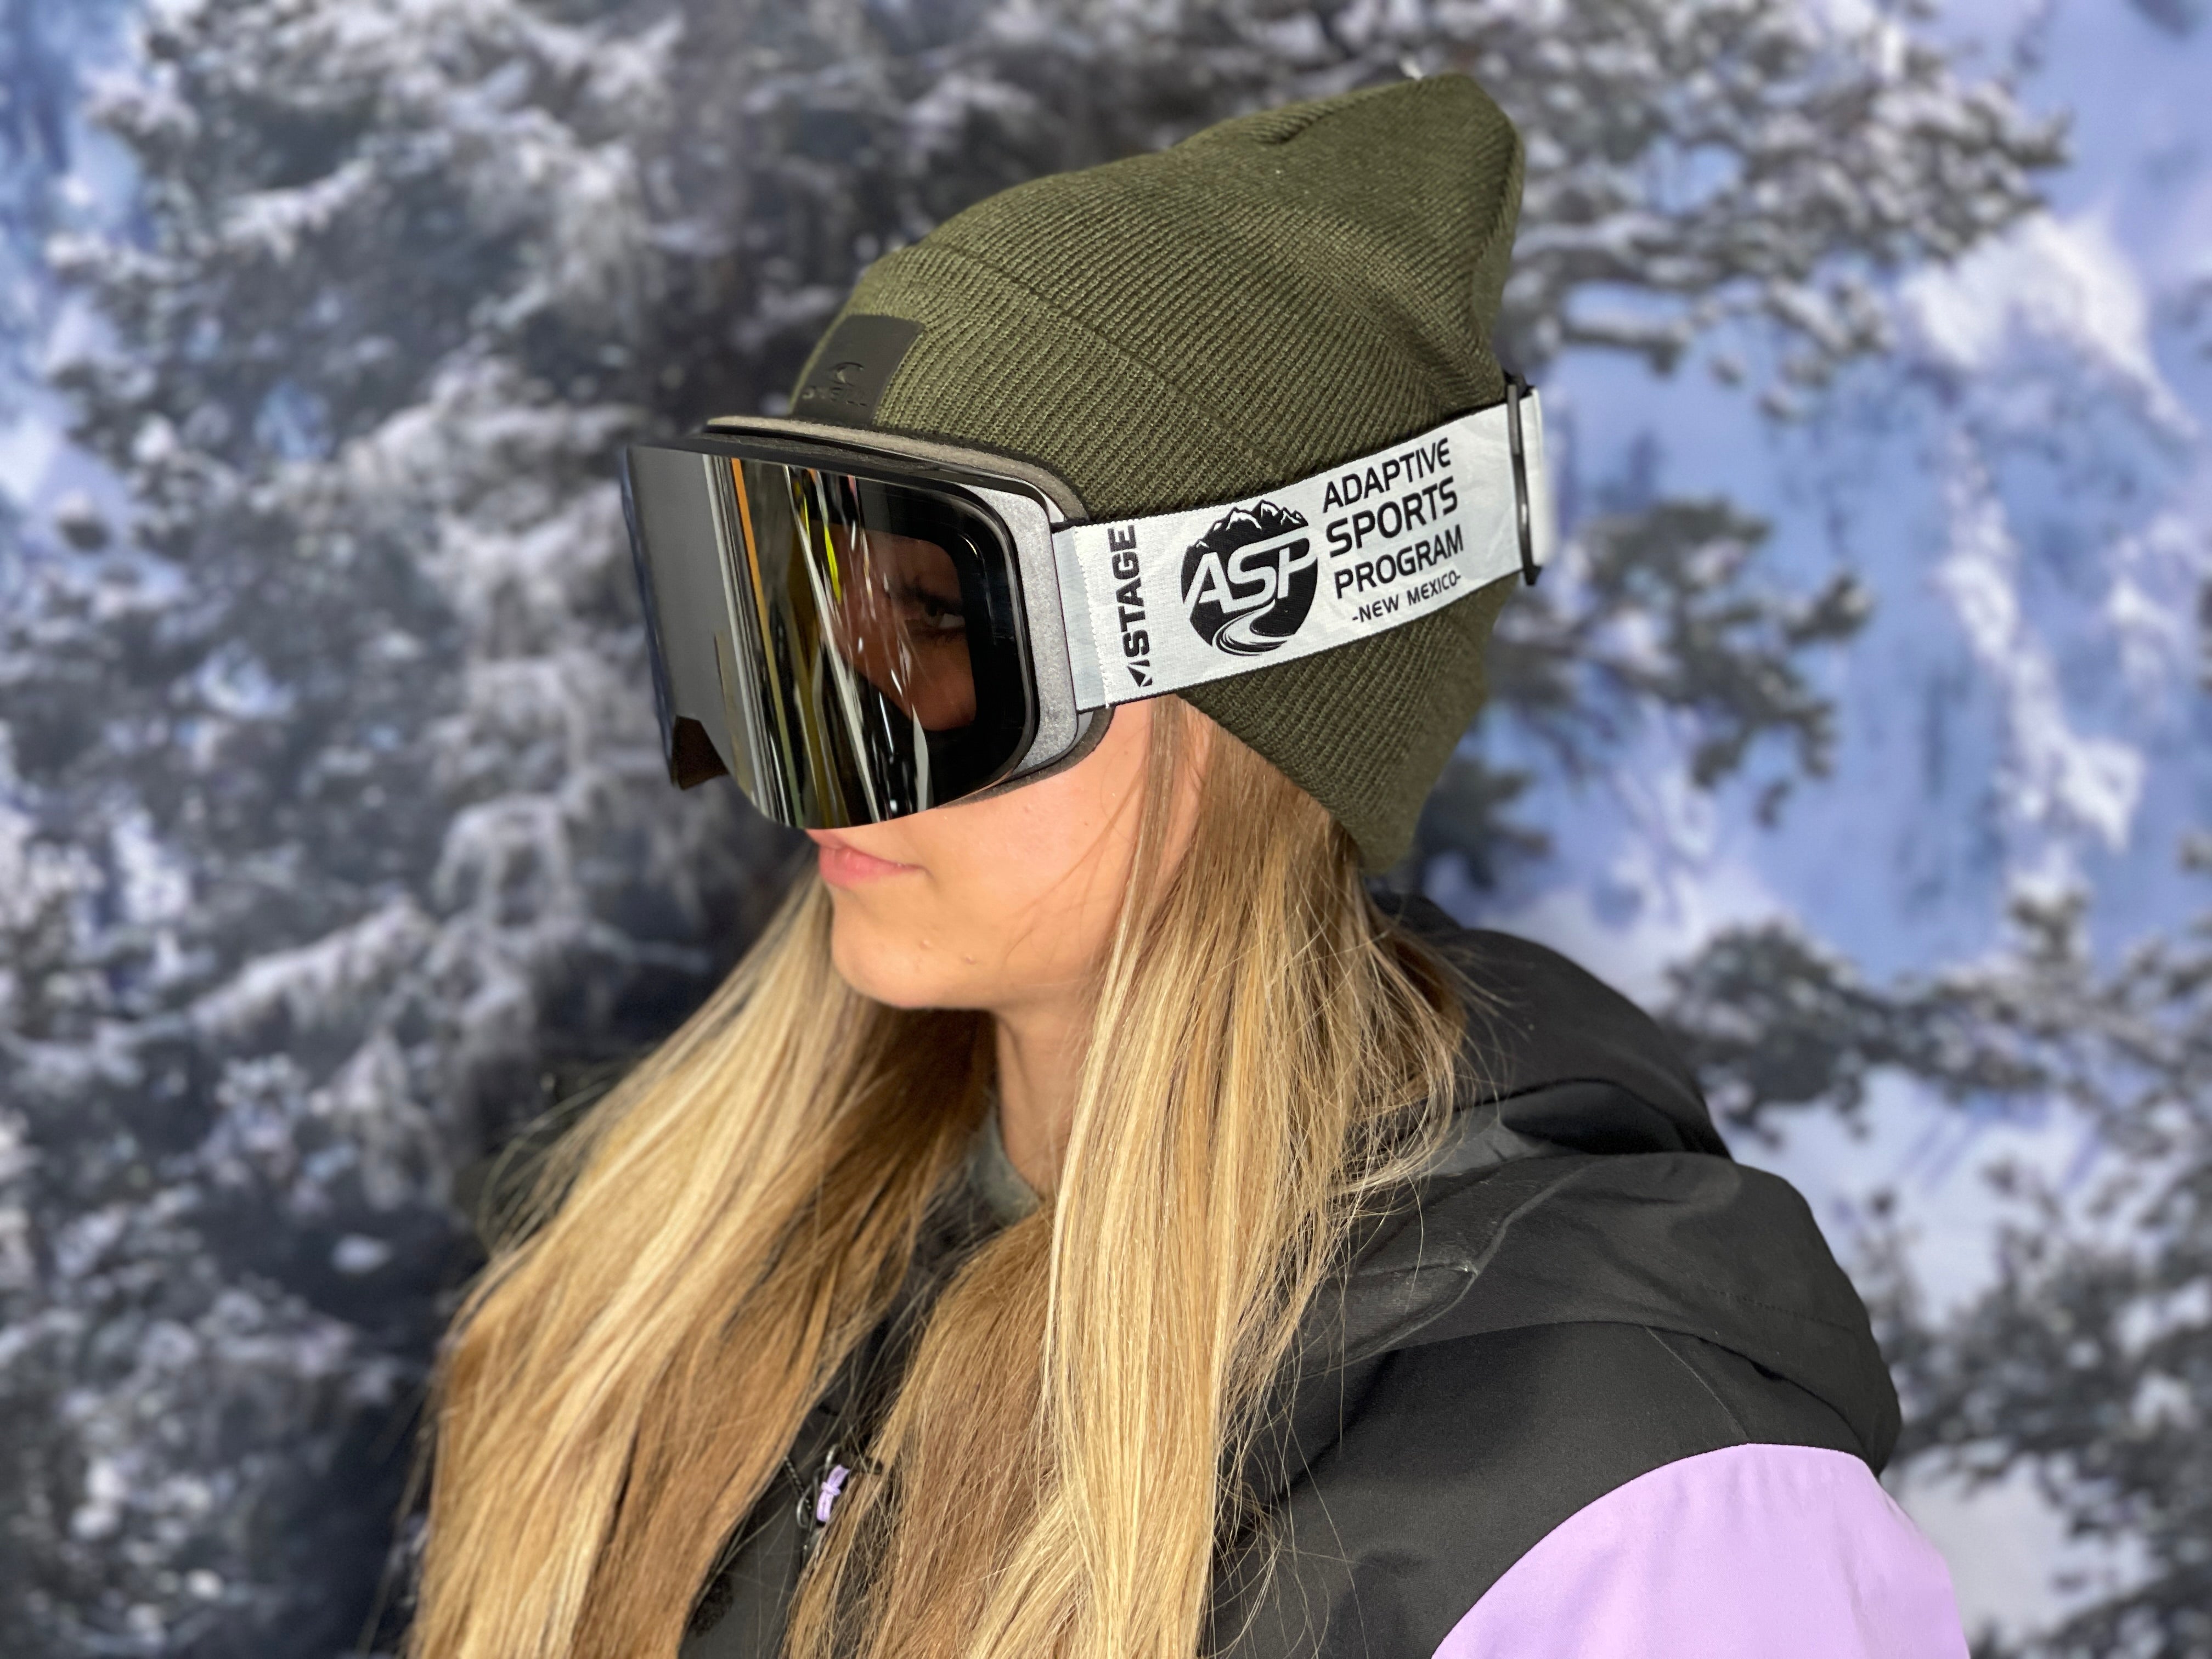 A woman wearing a pink and black ski jacket, green beanie, and STAGE custom ski goggles, standing against a snowy backdrop. The goggles feature "ASP Adaptive Sports Program - New Mexico" logo on the strap and a Mirror Chrome Smoke lens. The model of the goggle is the STAGE Frameless Prop Ski Goggle